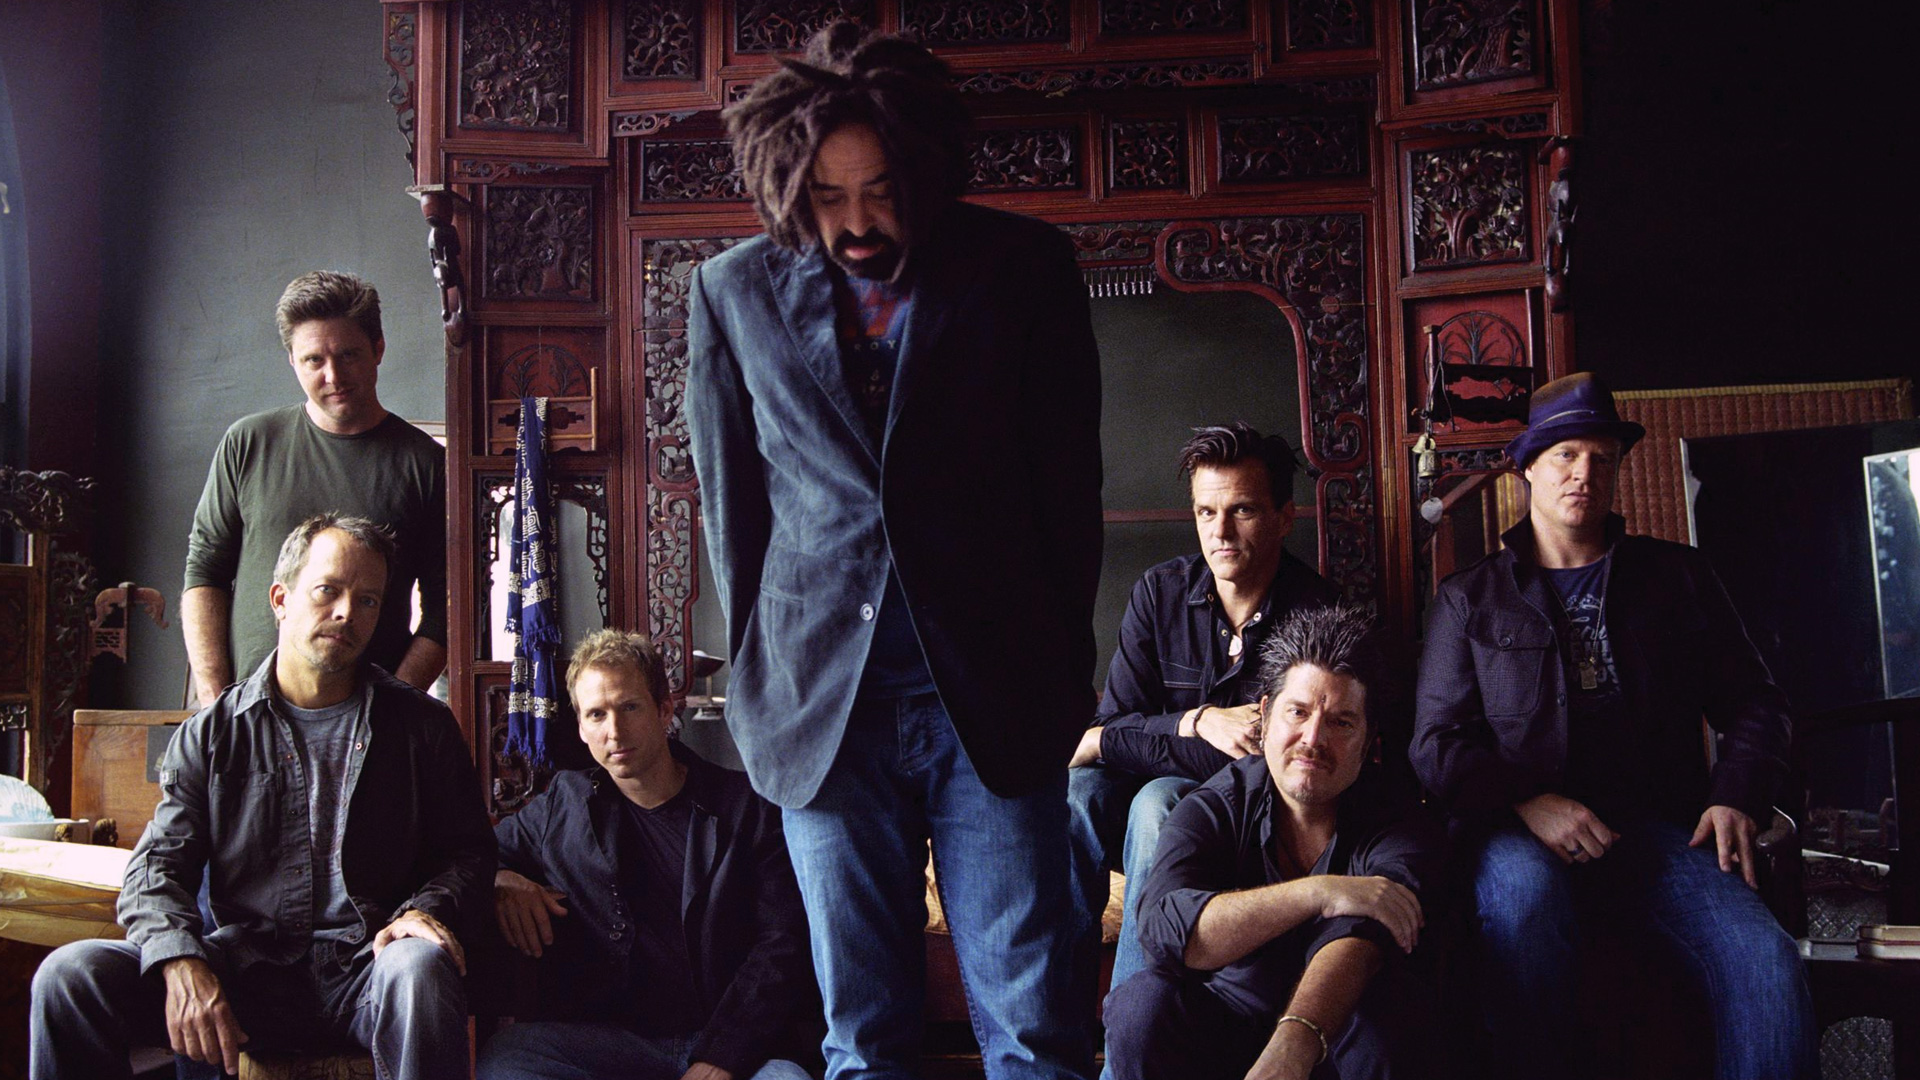 Counting Crows & Vanessa Carlt av Counting Crows